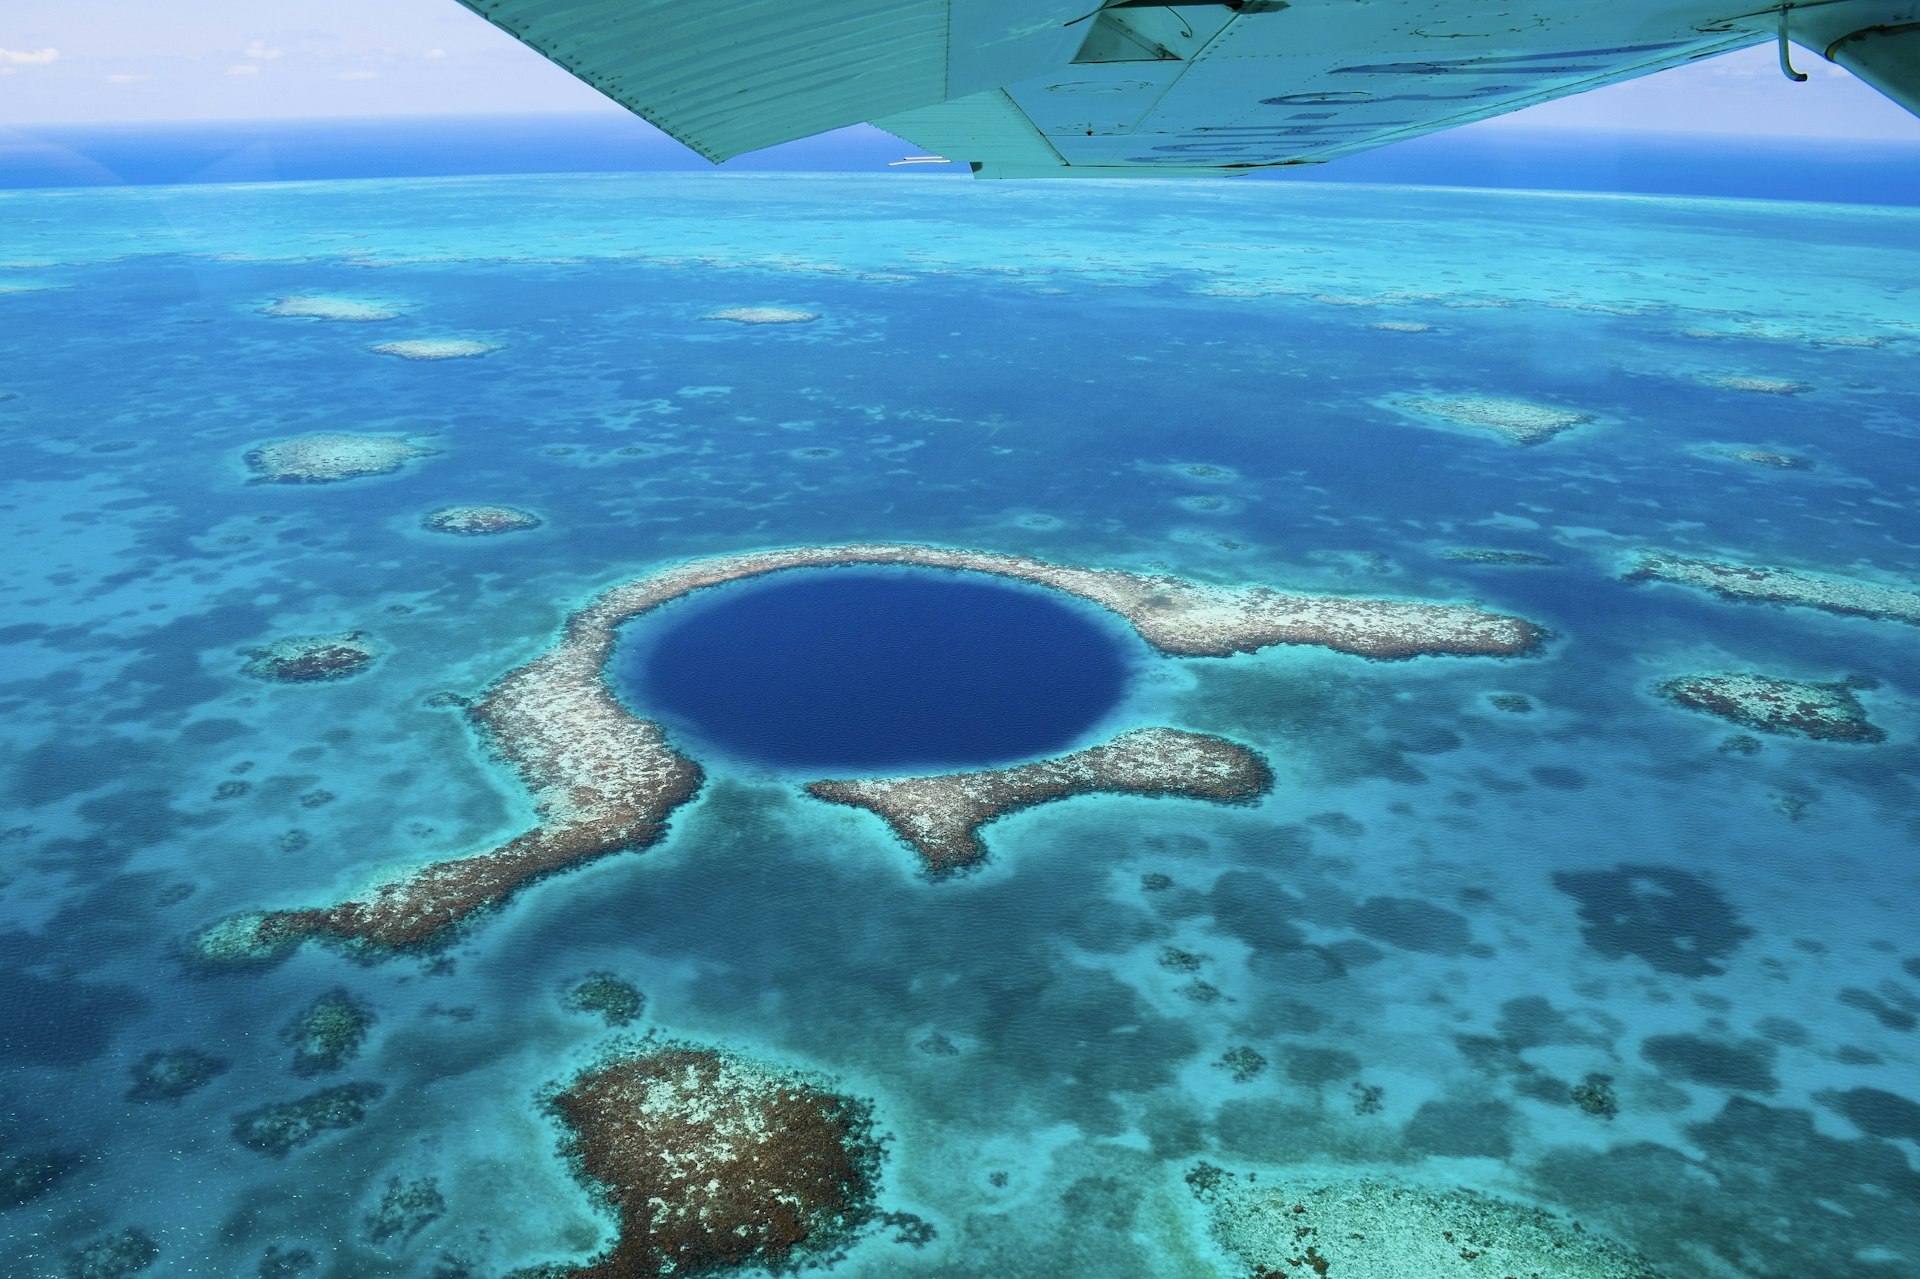 The image looks down the underside of a light aircraft's wing to the deep blue circular hole in the Light House Reef; the surrounding waters are turquoise in colour.